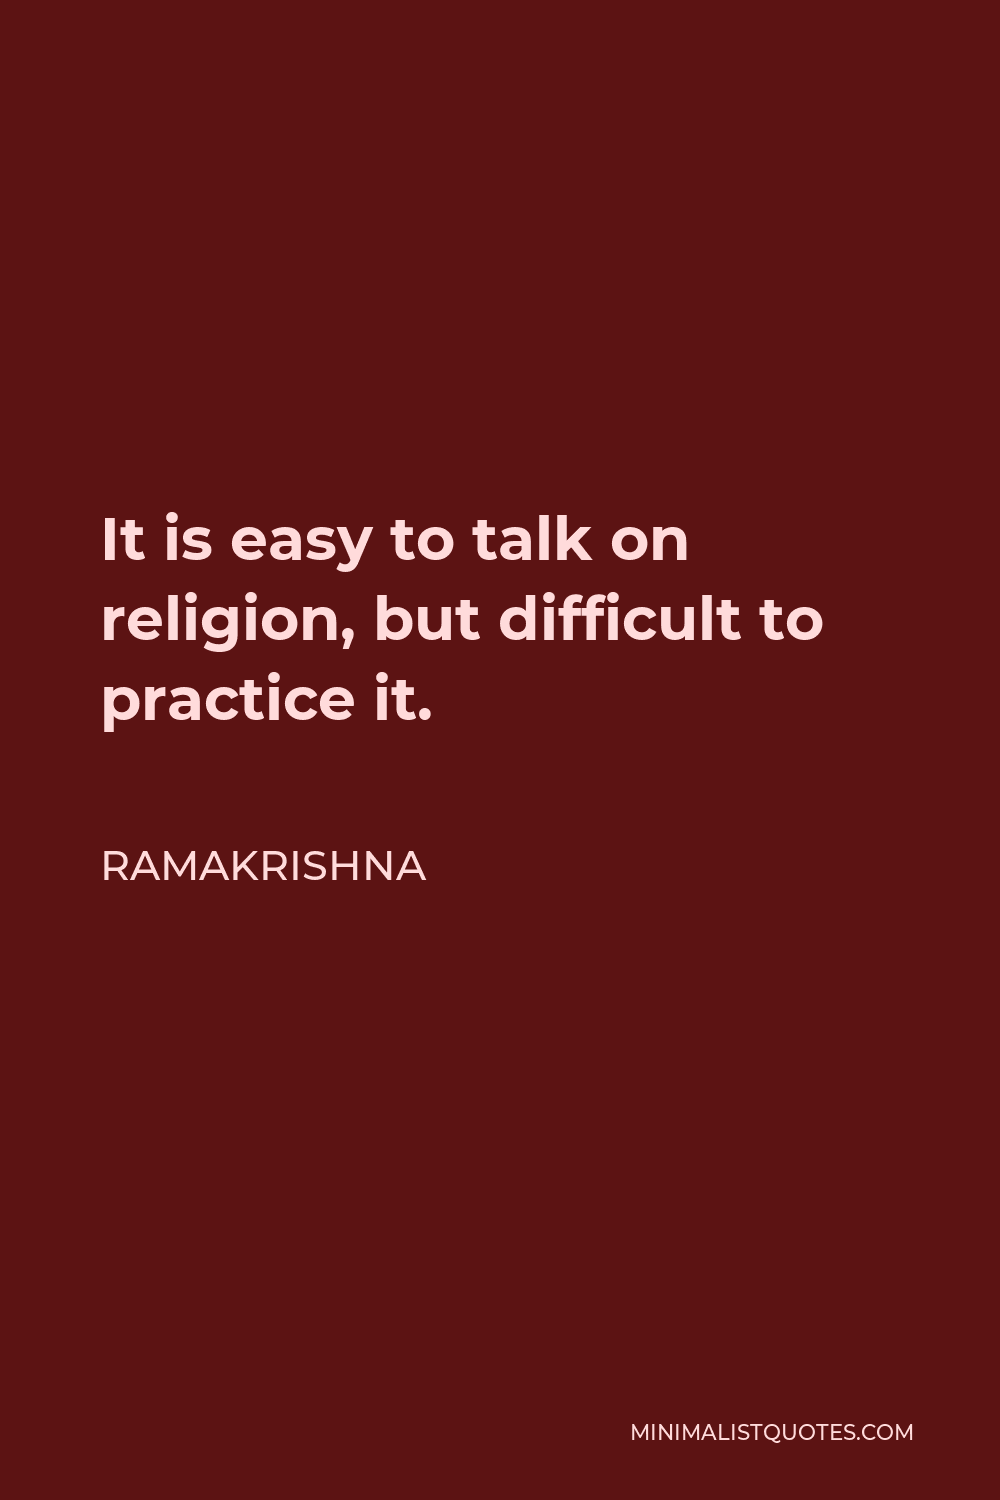 Ramakrishna Quote - It is easy to talk on religion, but difficult to practice it.